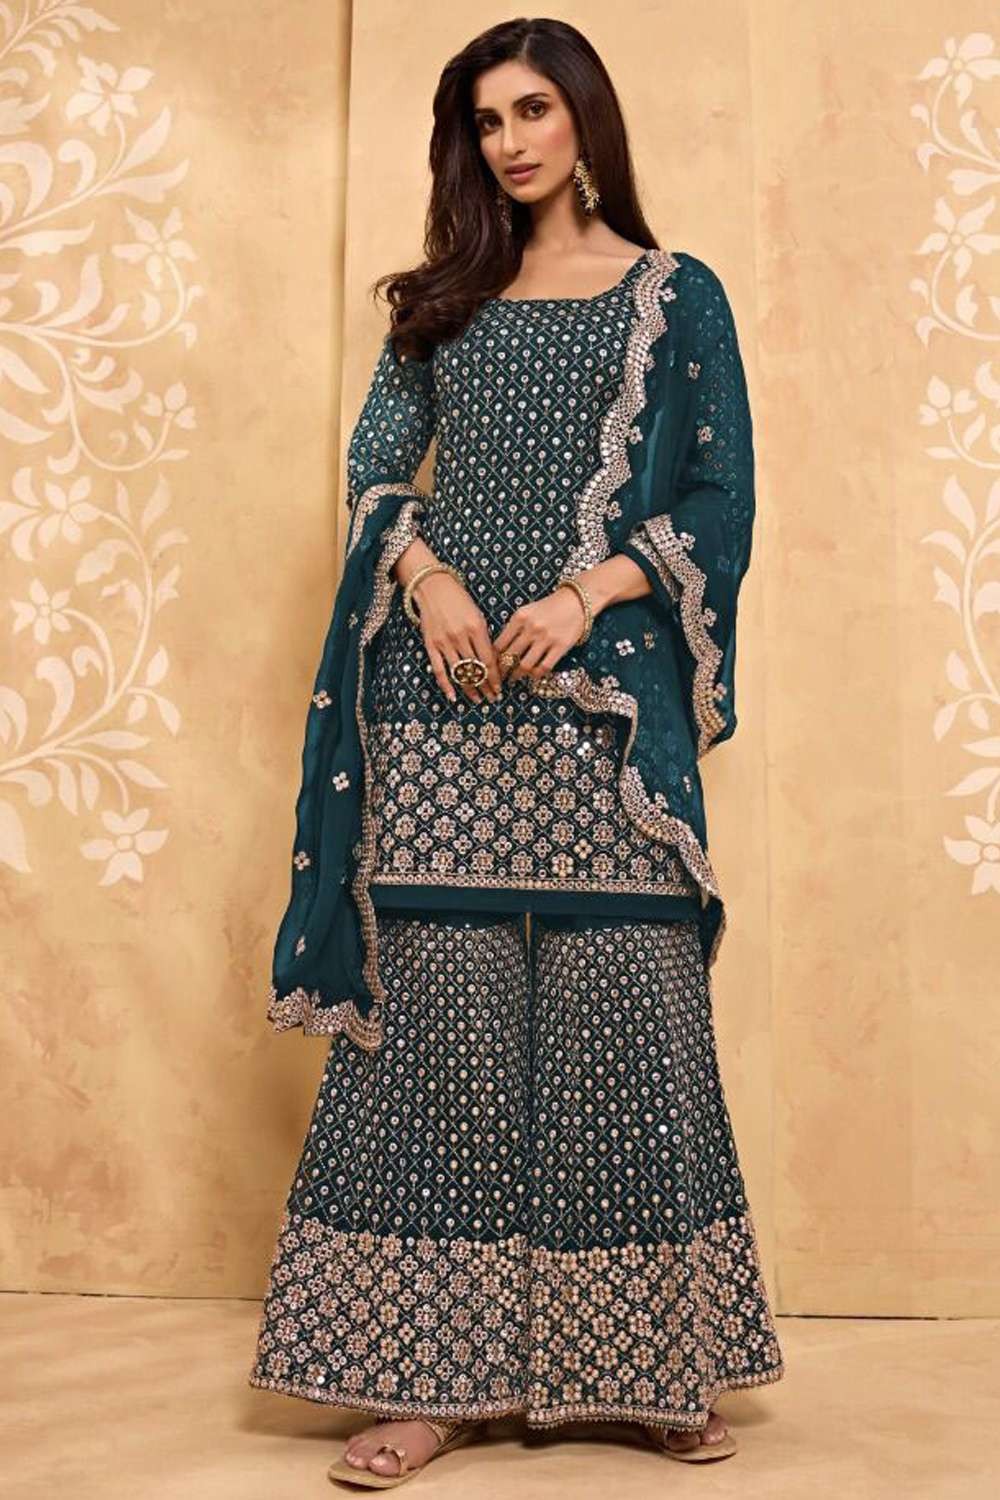 Heavy Sharara Suit Party Wear for the Fashionable Woman